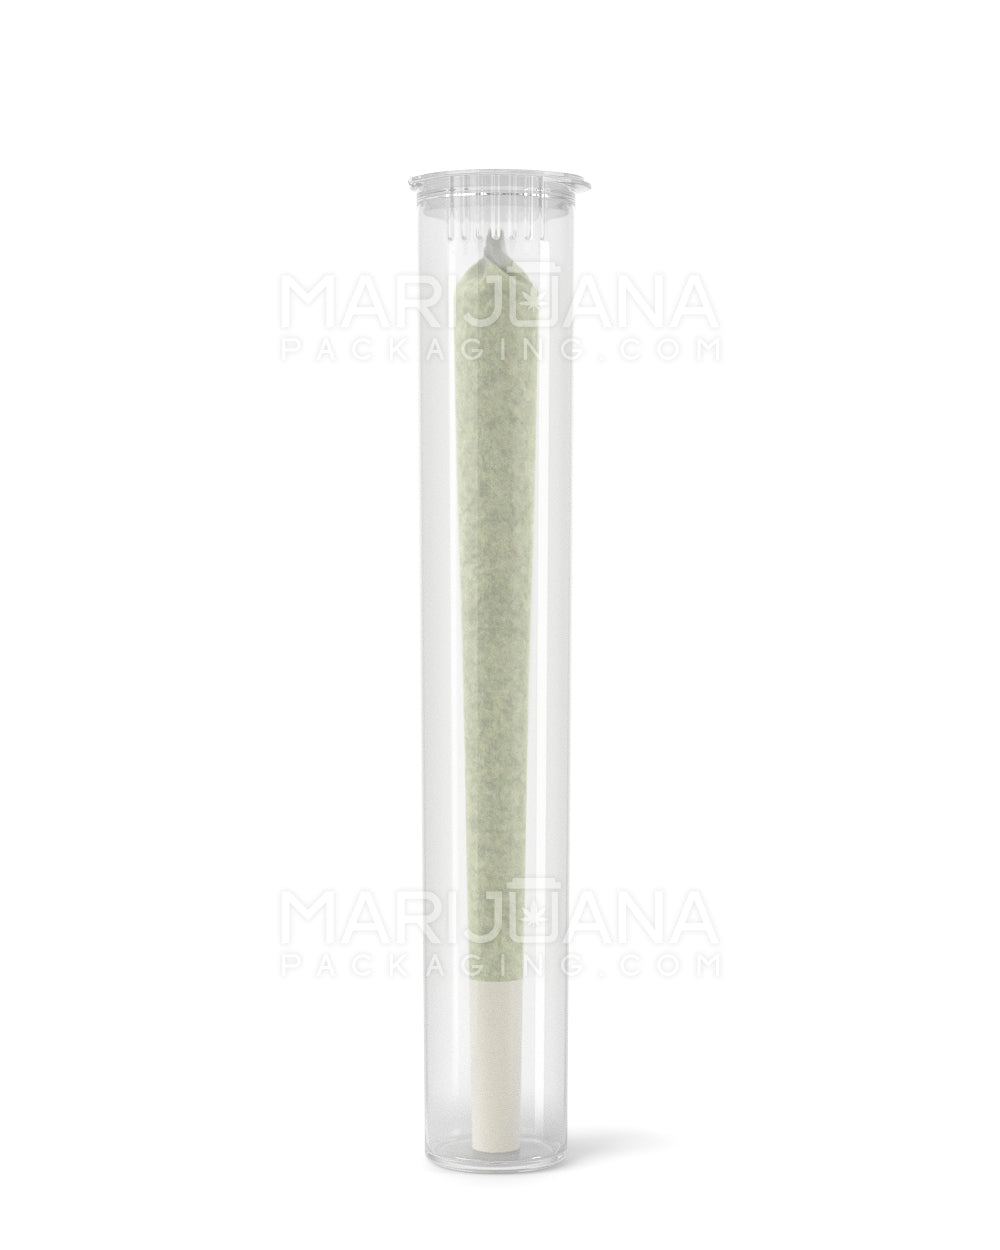 Child Resistant | King Size Pop Top Plastic Pre-Roll Tubes | 116mm - Clear - 1000 Count - 2